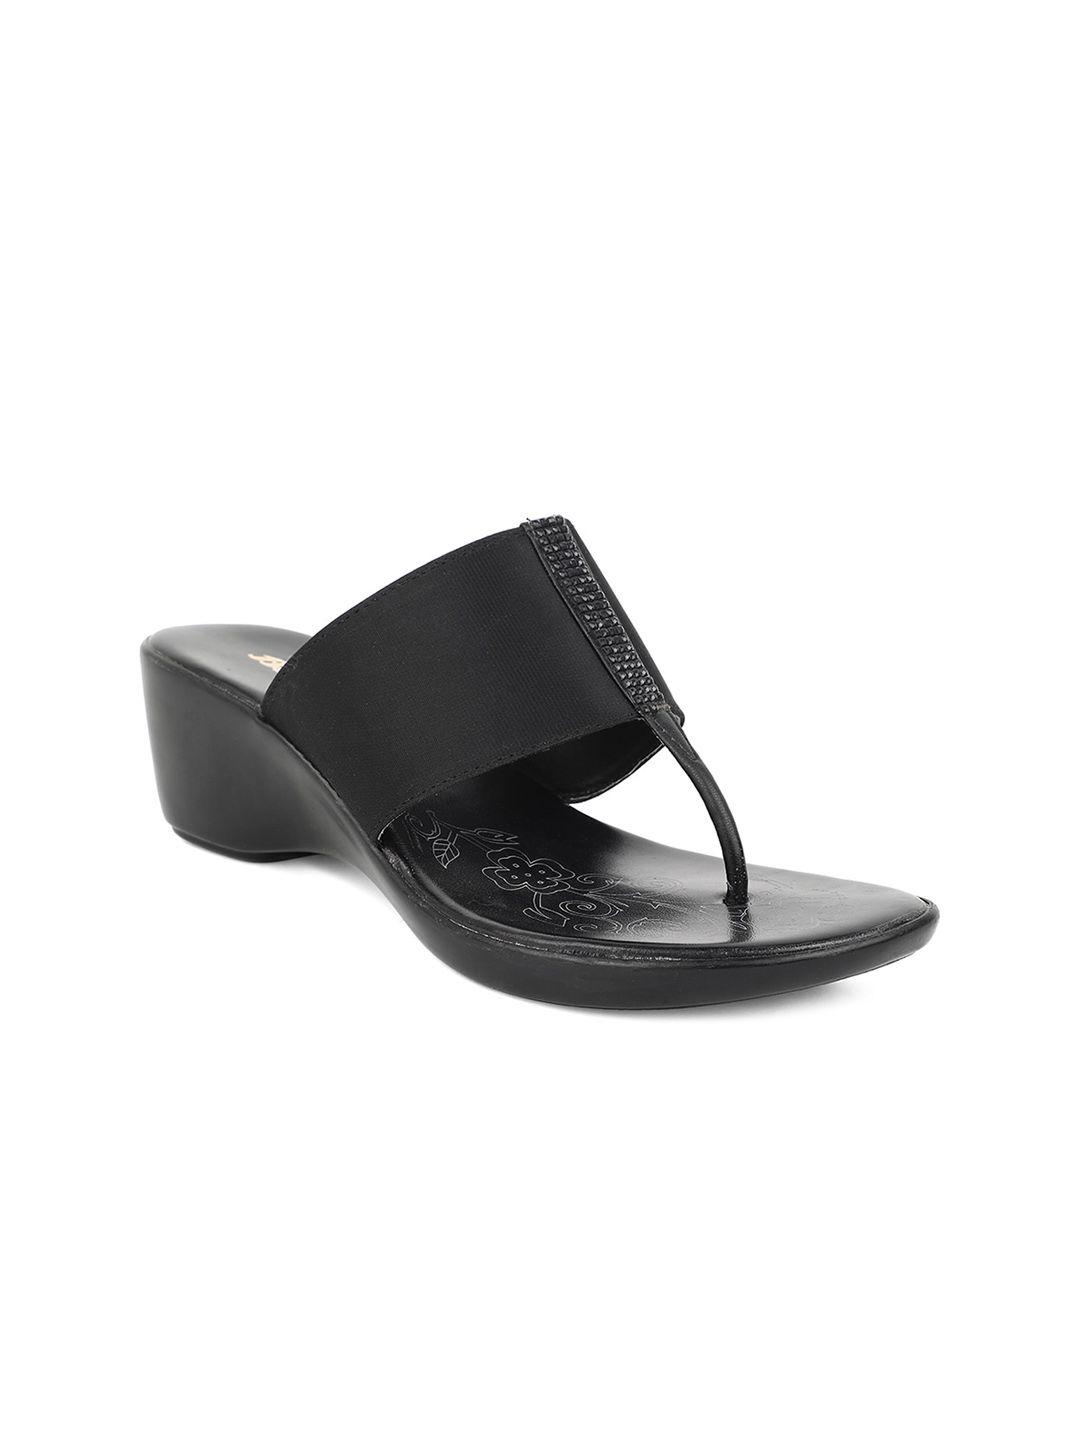 bata-black-embellished-wedge-mules-with-laser-cuts